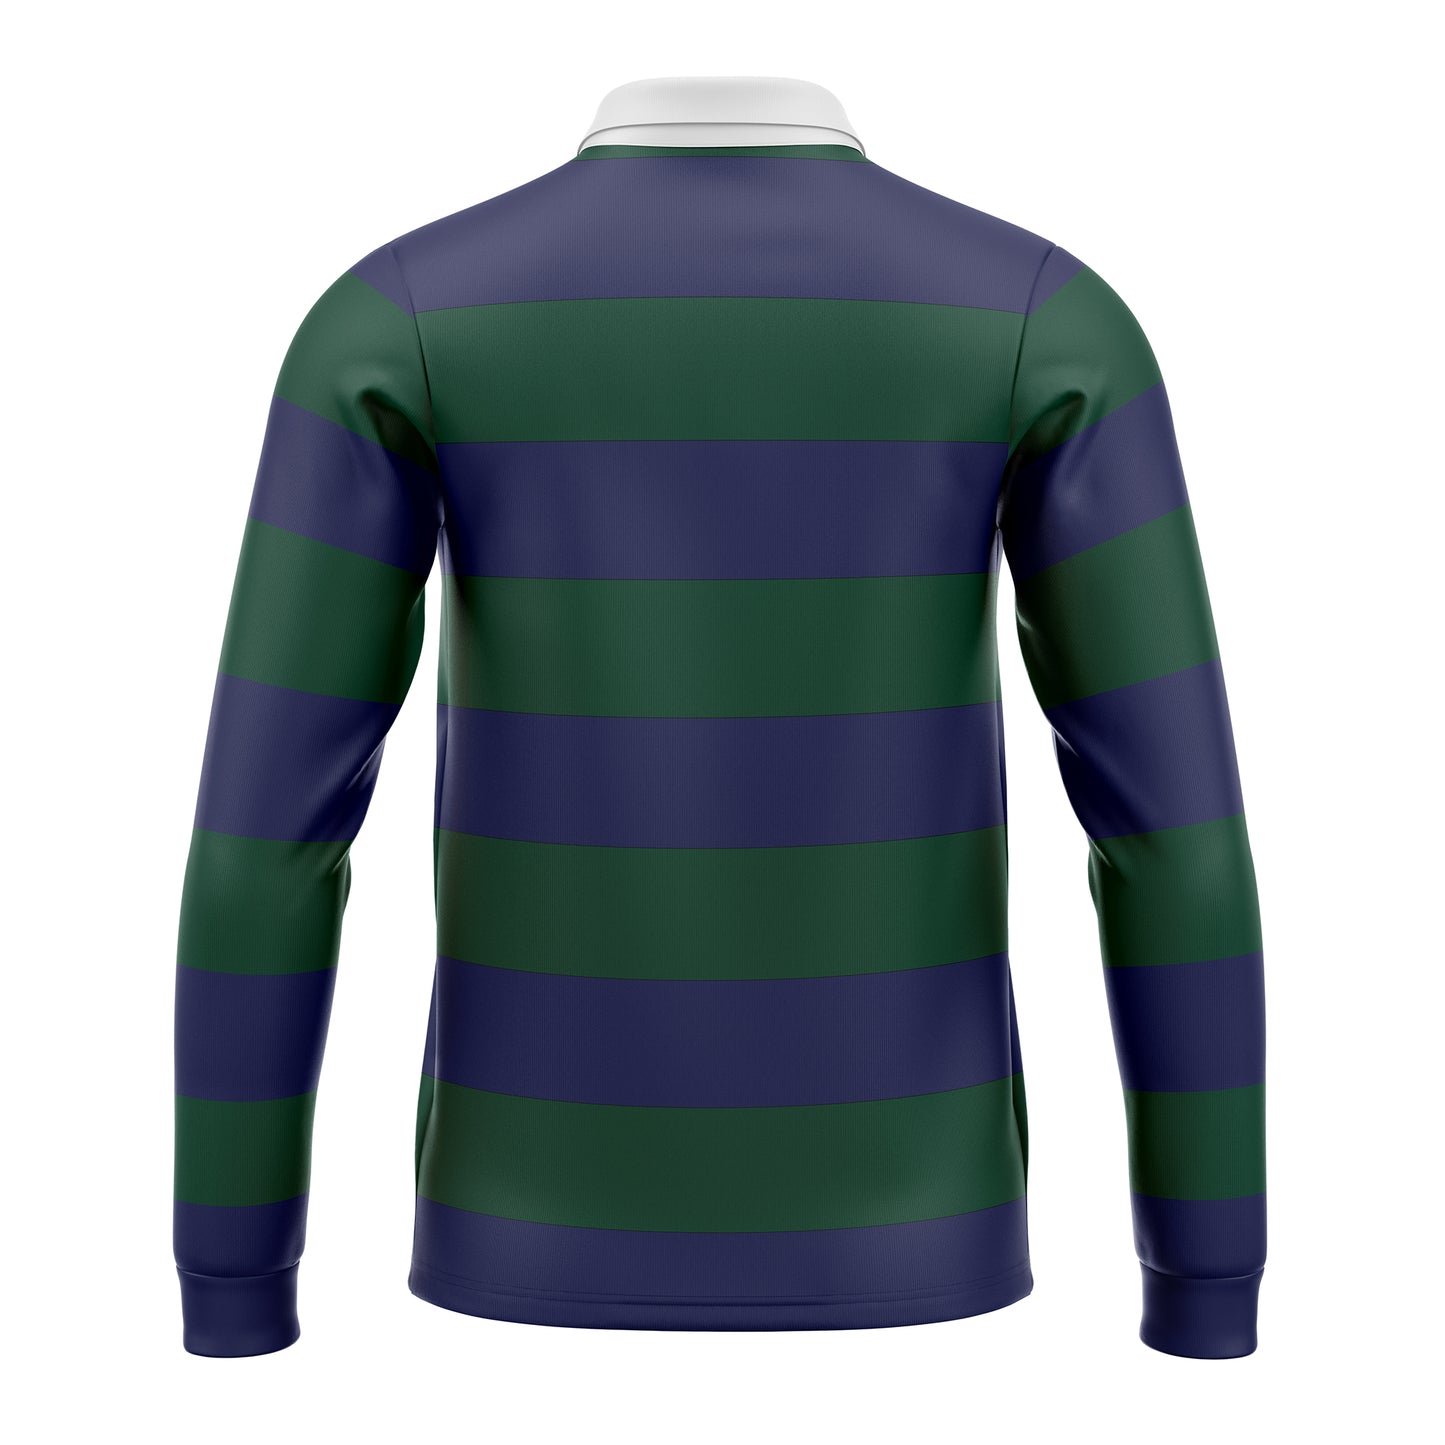 Multi Stripe Navy and Bottle Green Rugby Jersey